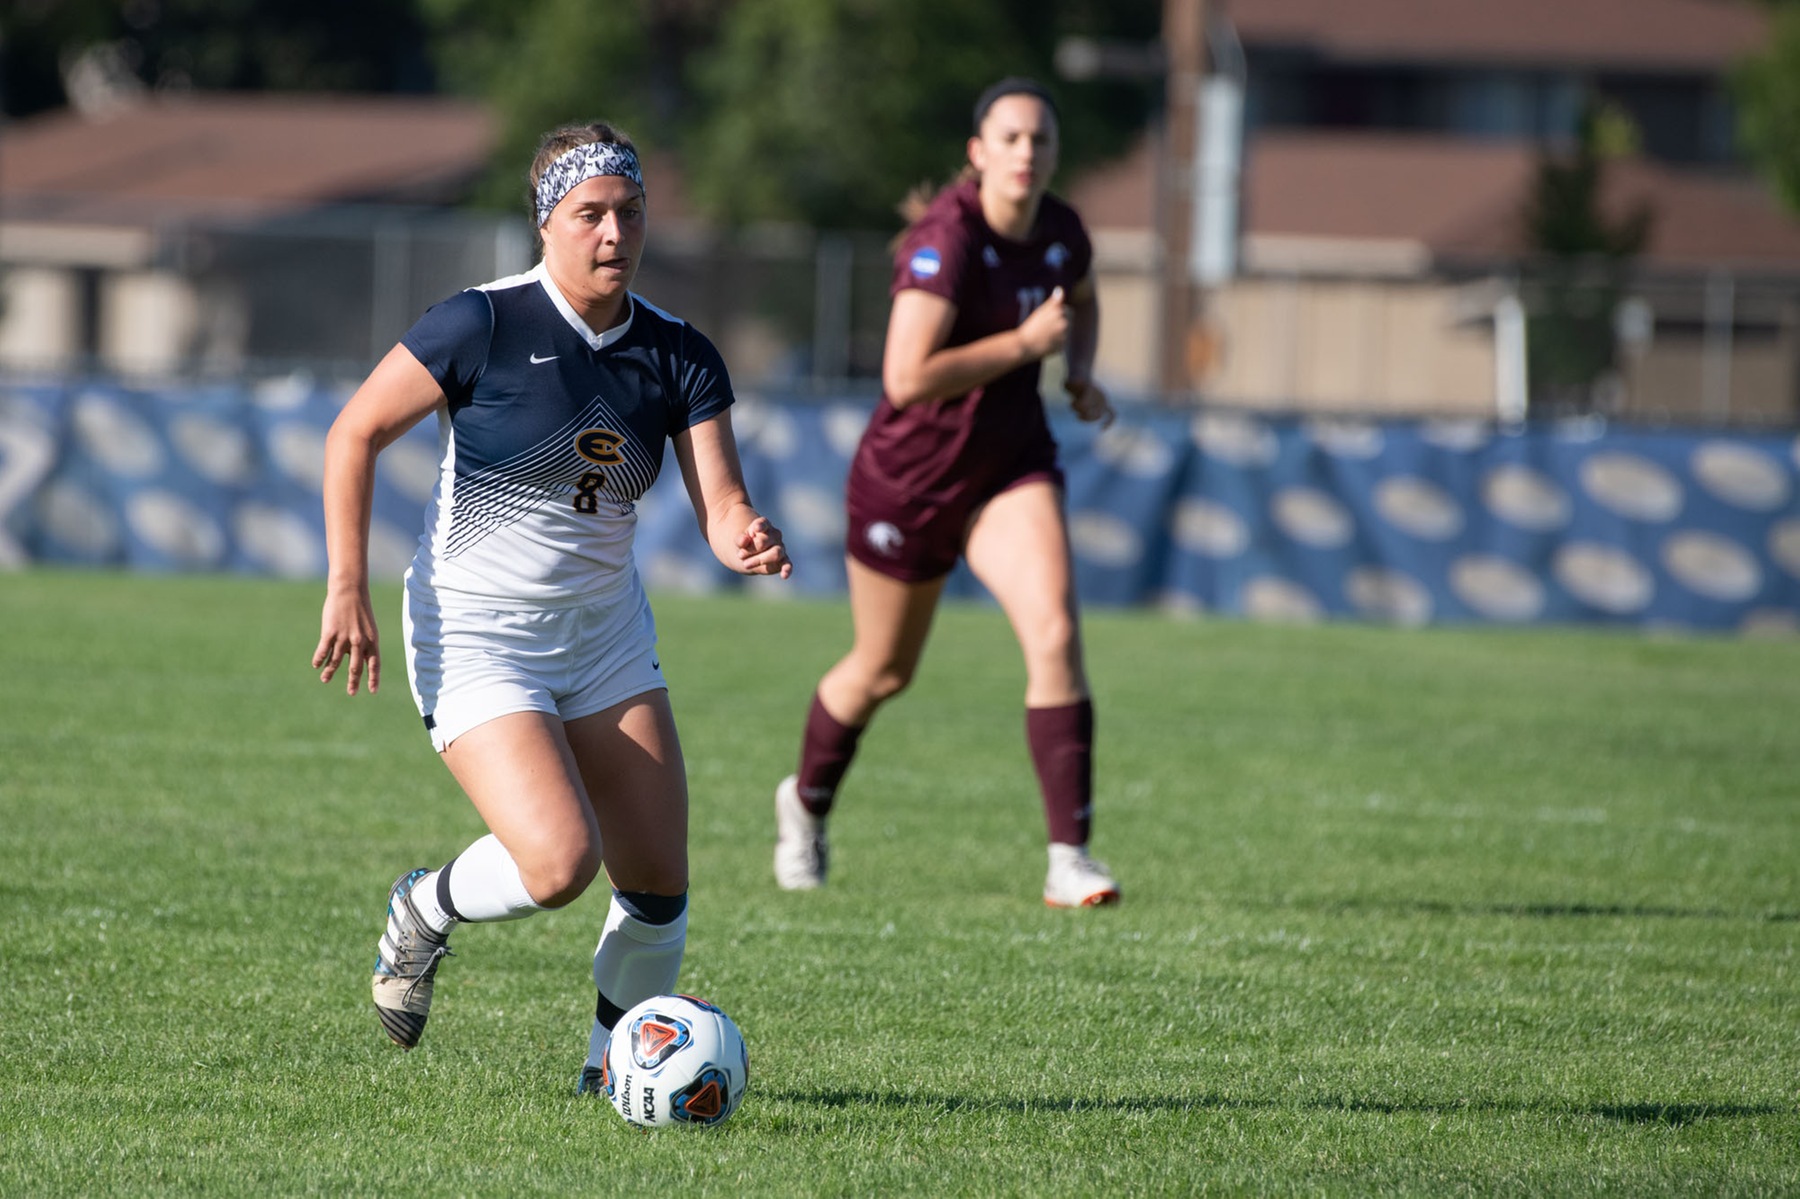 Blugolds shut out Northland in 6-0 win